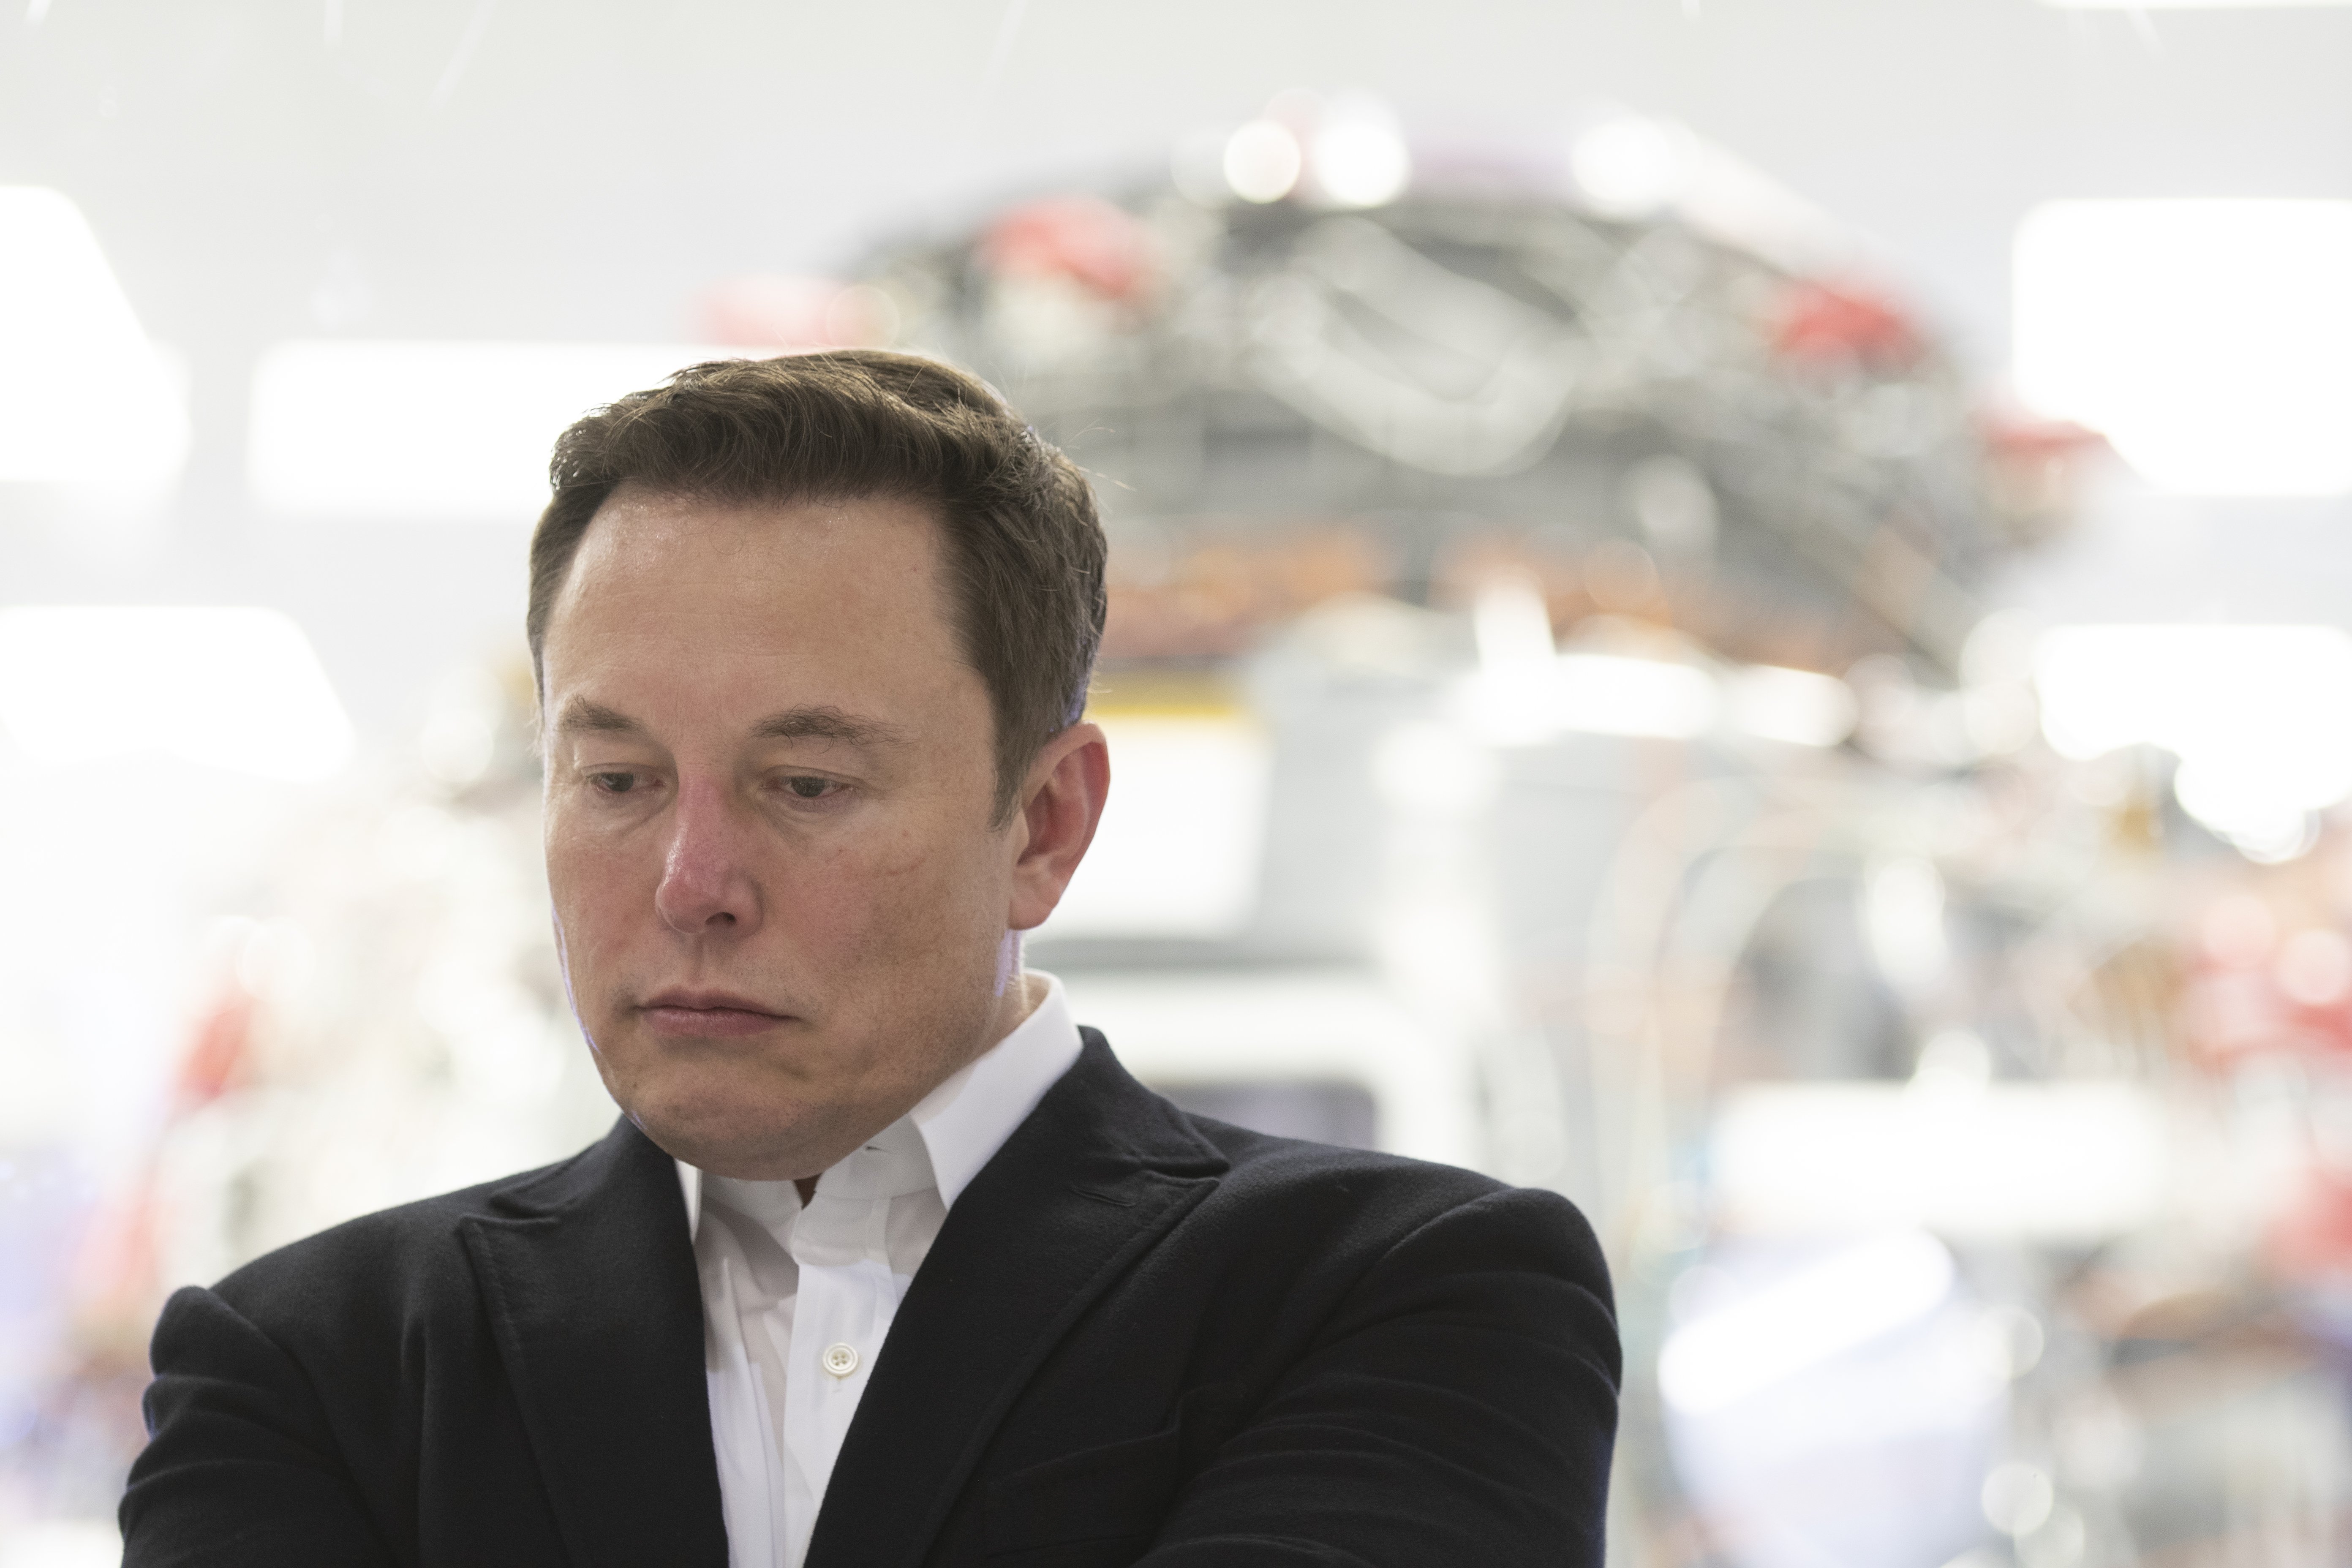 Elon Musk pictured at SpaceX Headquarters, 2019, Hawthorne, California. | Photo: Getty Images